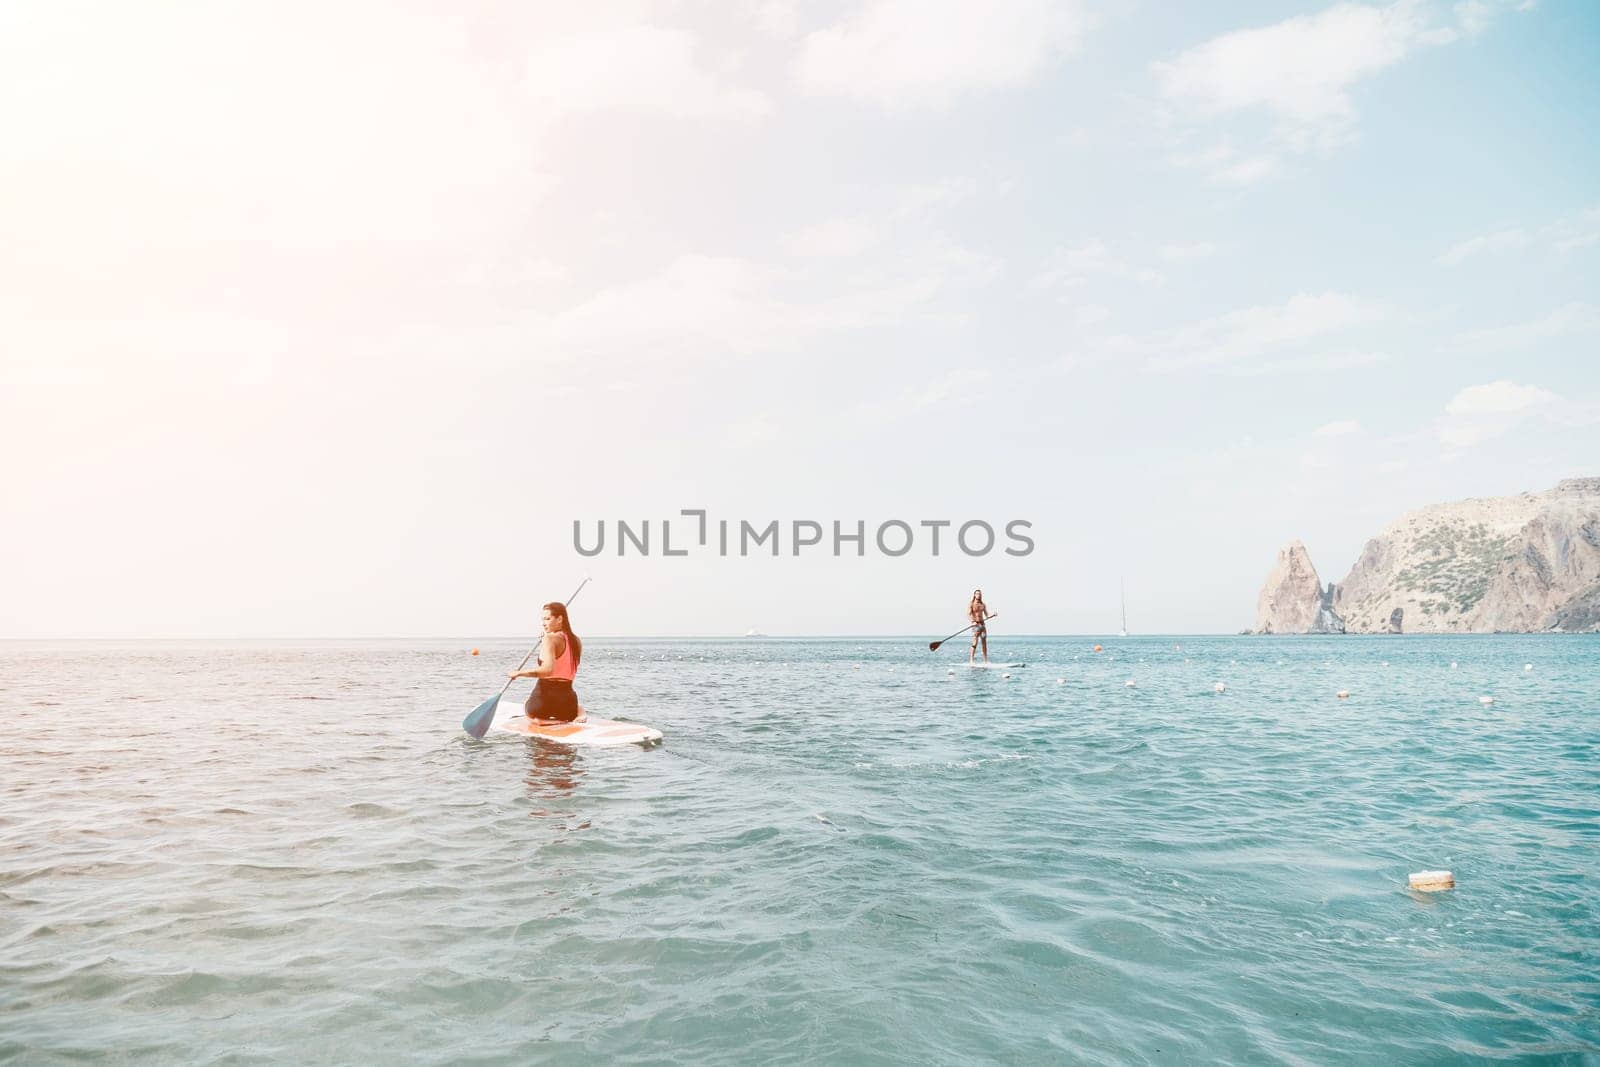 Woman sup yoga. Happy young sporty woman practising yoga pilates on paddle sup surfboard. Female stretching doing workout on sea water. Modern individual female outdoor summer sport activity